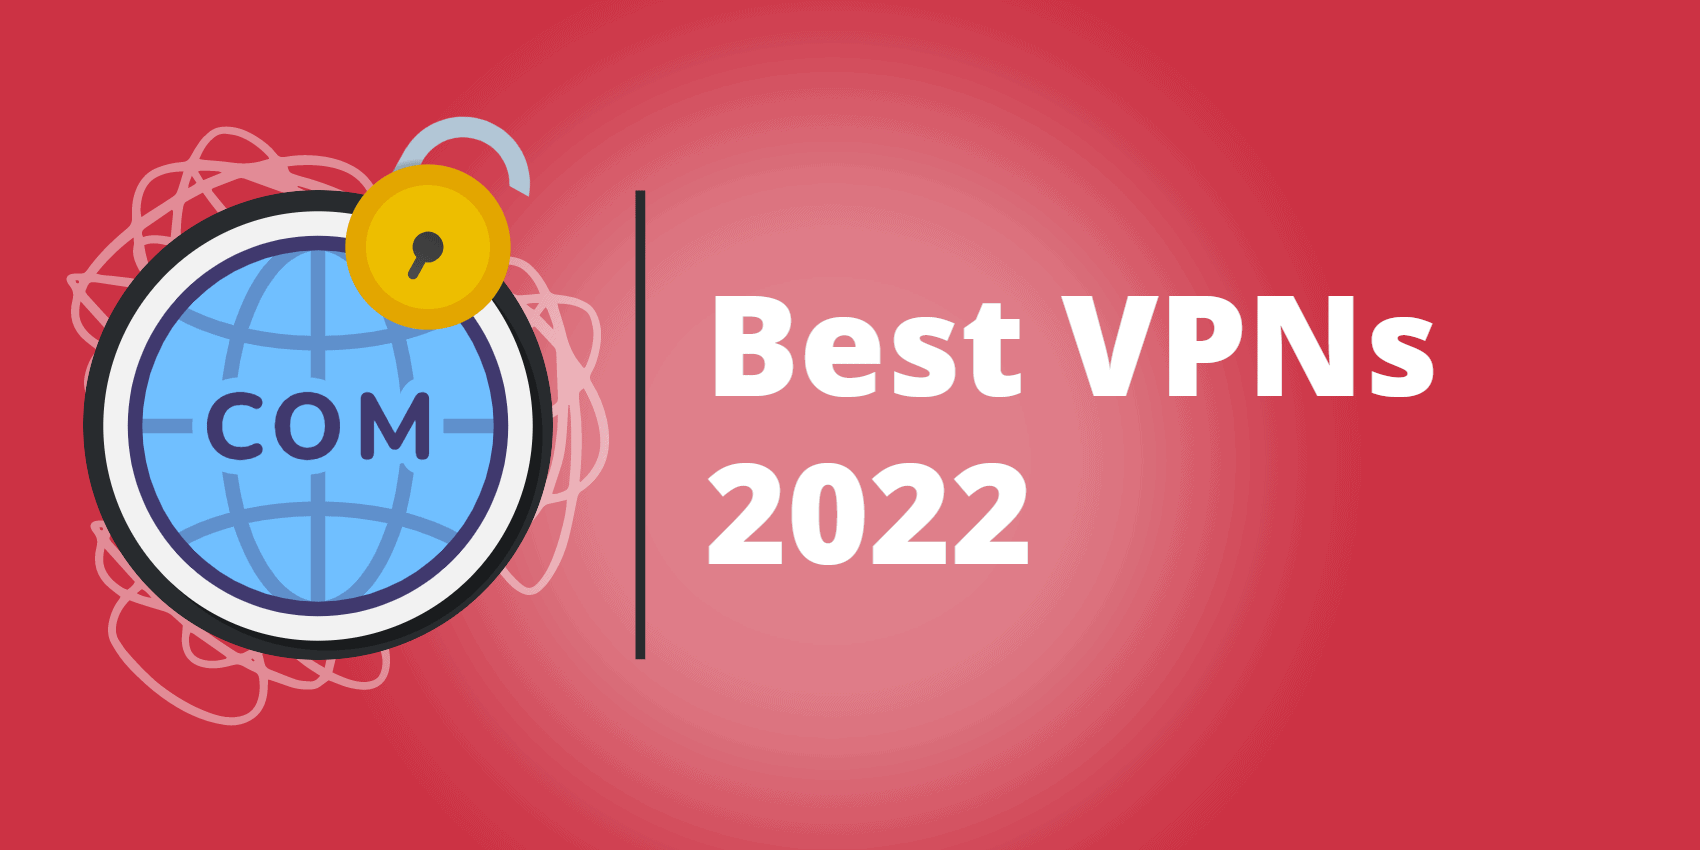 The Best VPNs for Streaming TV Watch Netflix, Prime Video and More 2023